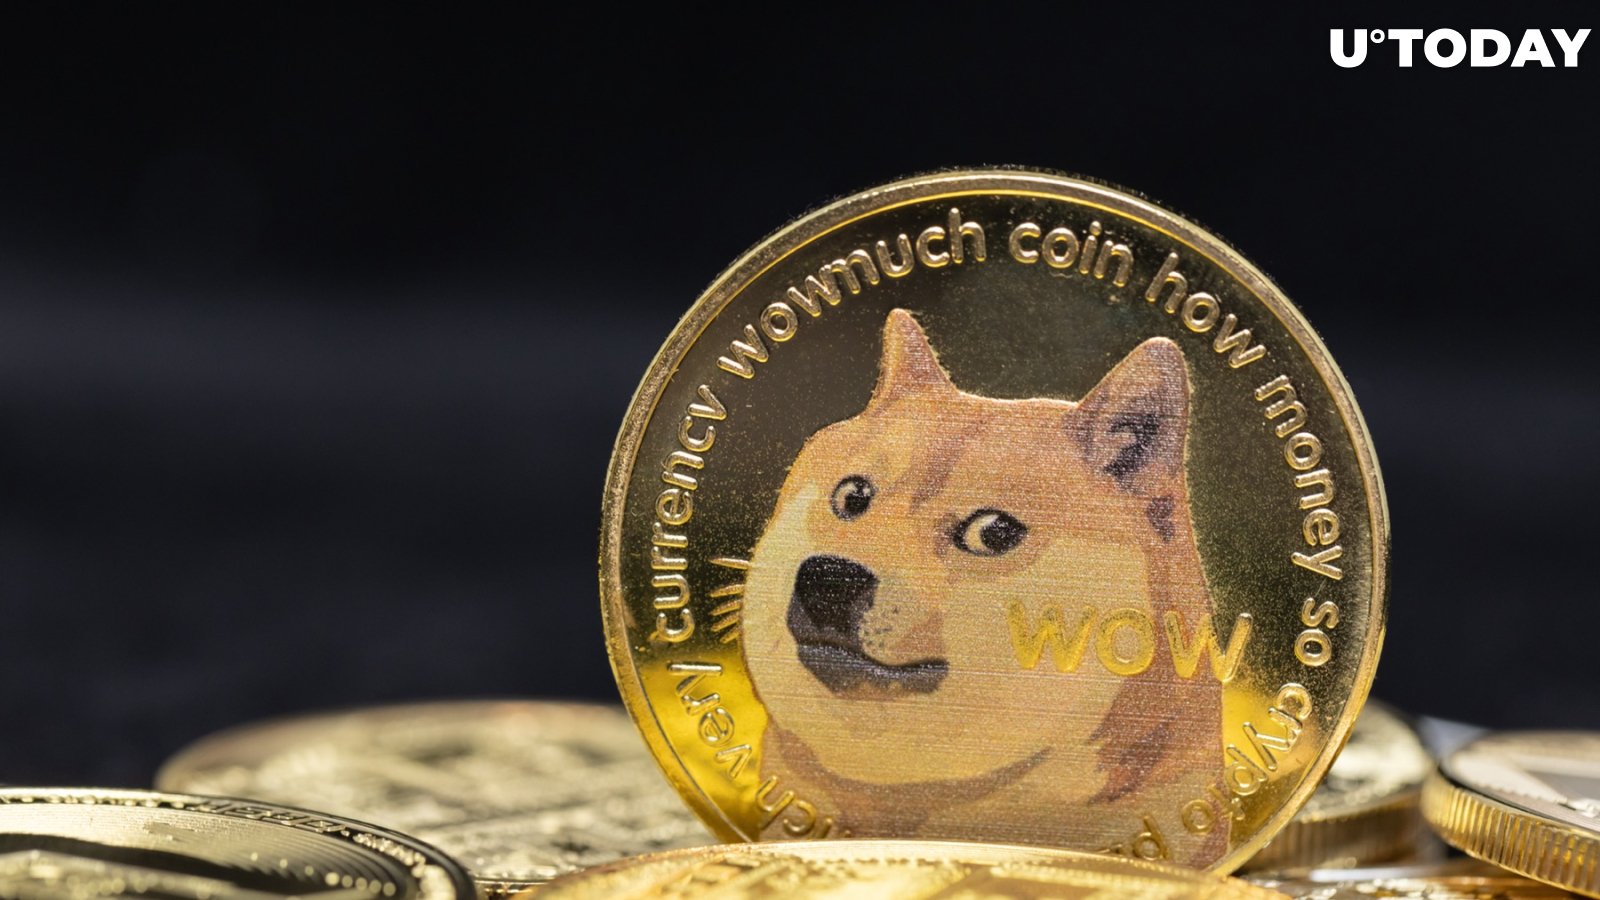 Shiba Inu Dog Behind Doge Meme in “Very Dangerous” Condition 